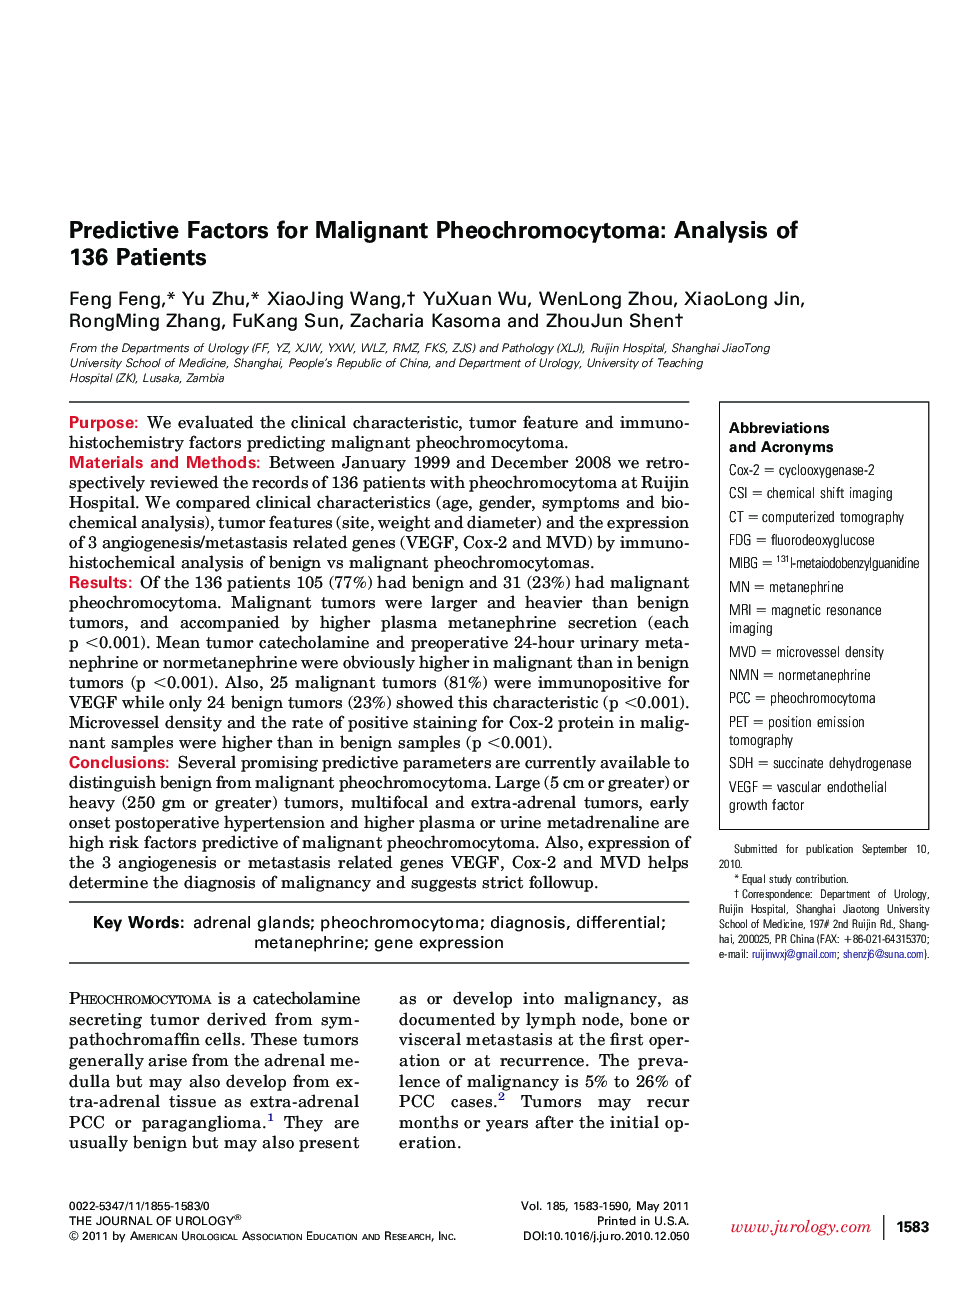 Predictive Factors for Malignant Pheochromocytoma: Analysis of 136 Patients